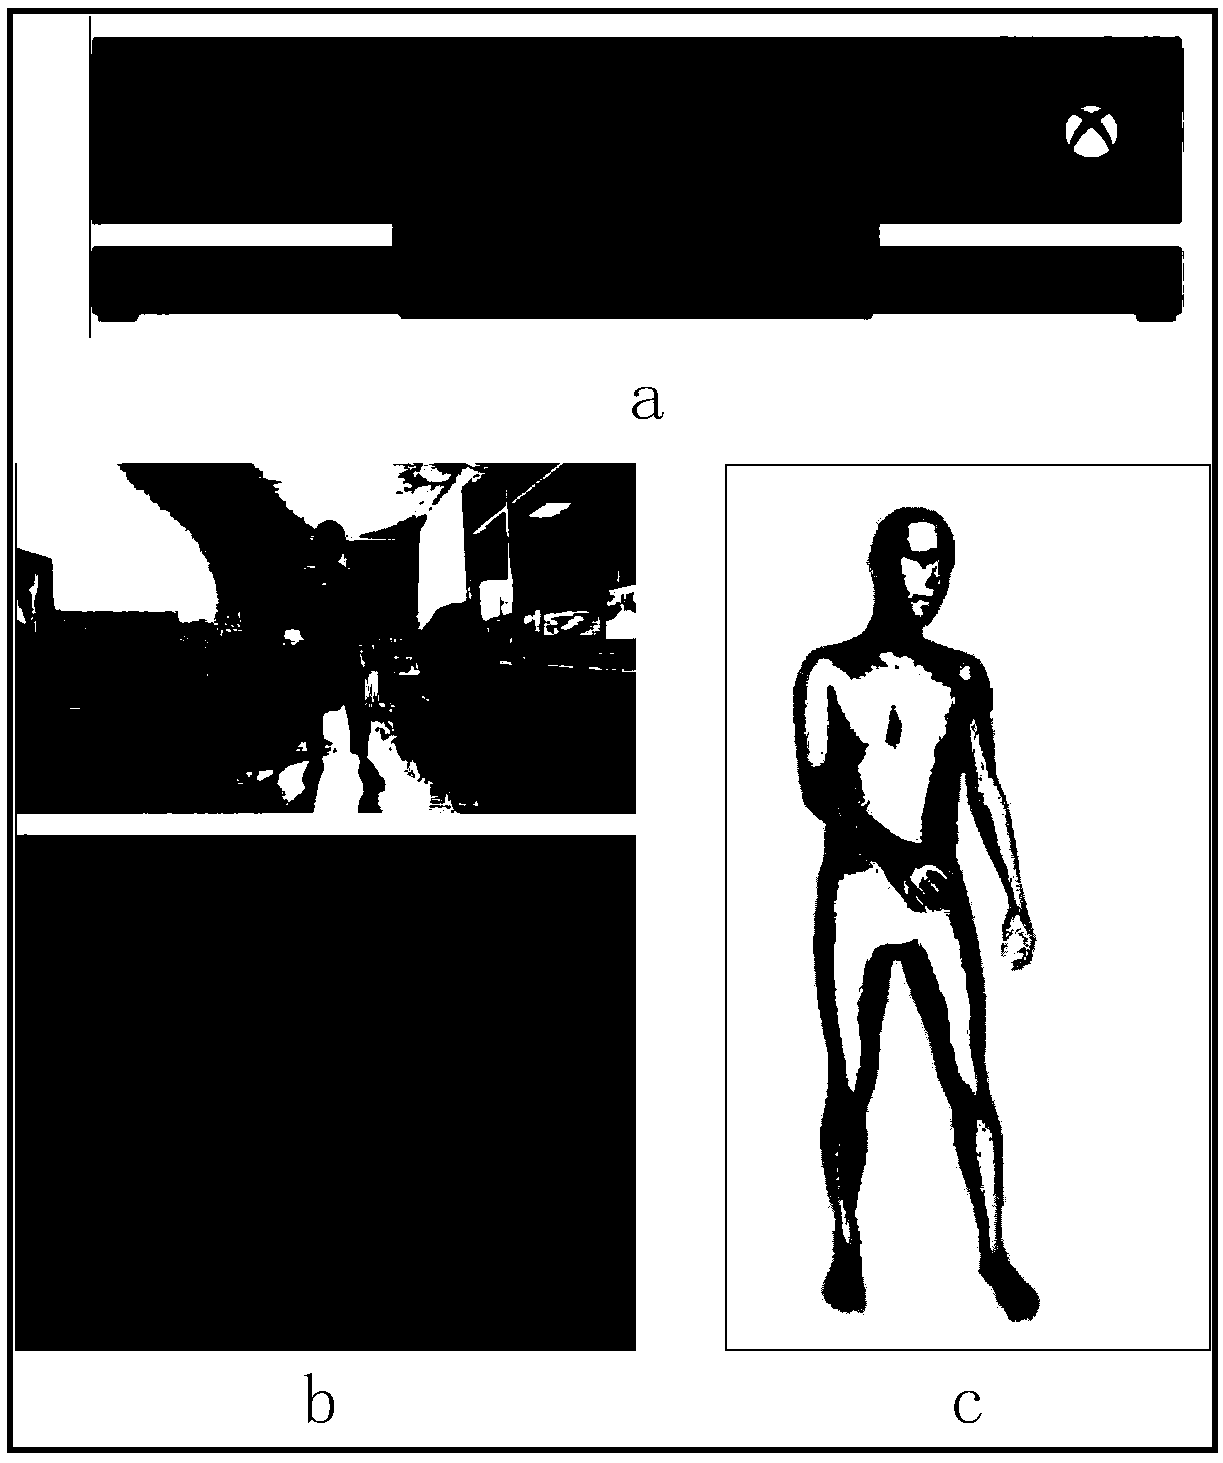 A method for estimating three-dimensional human body postures and hand information